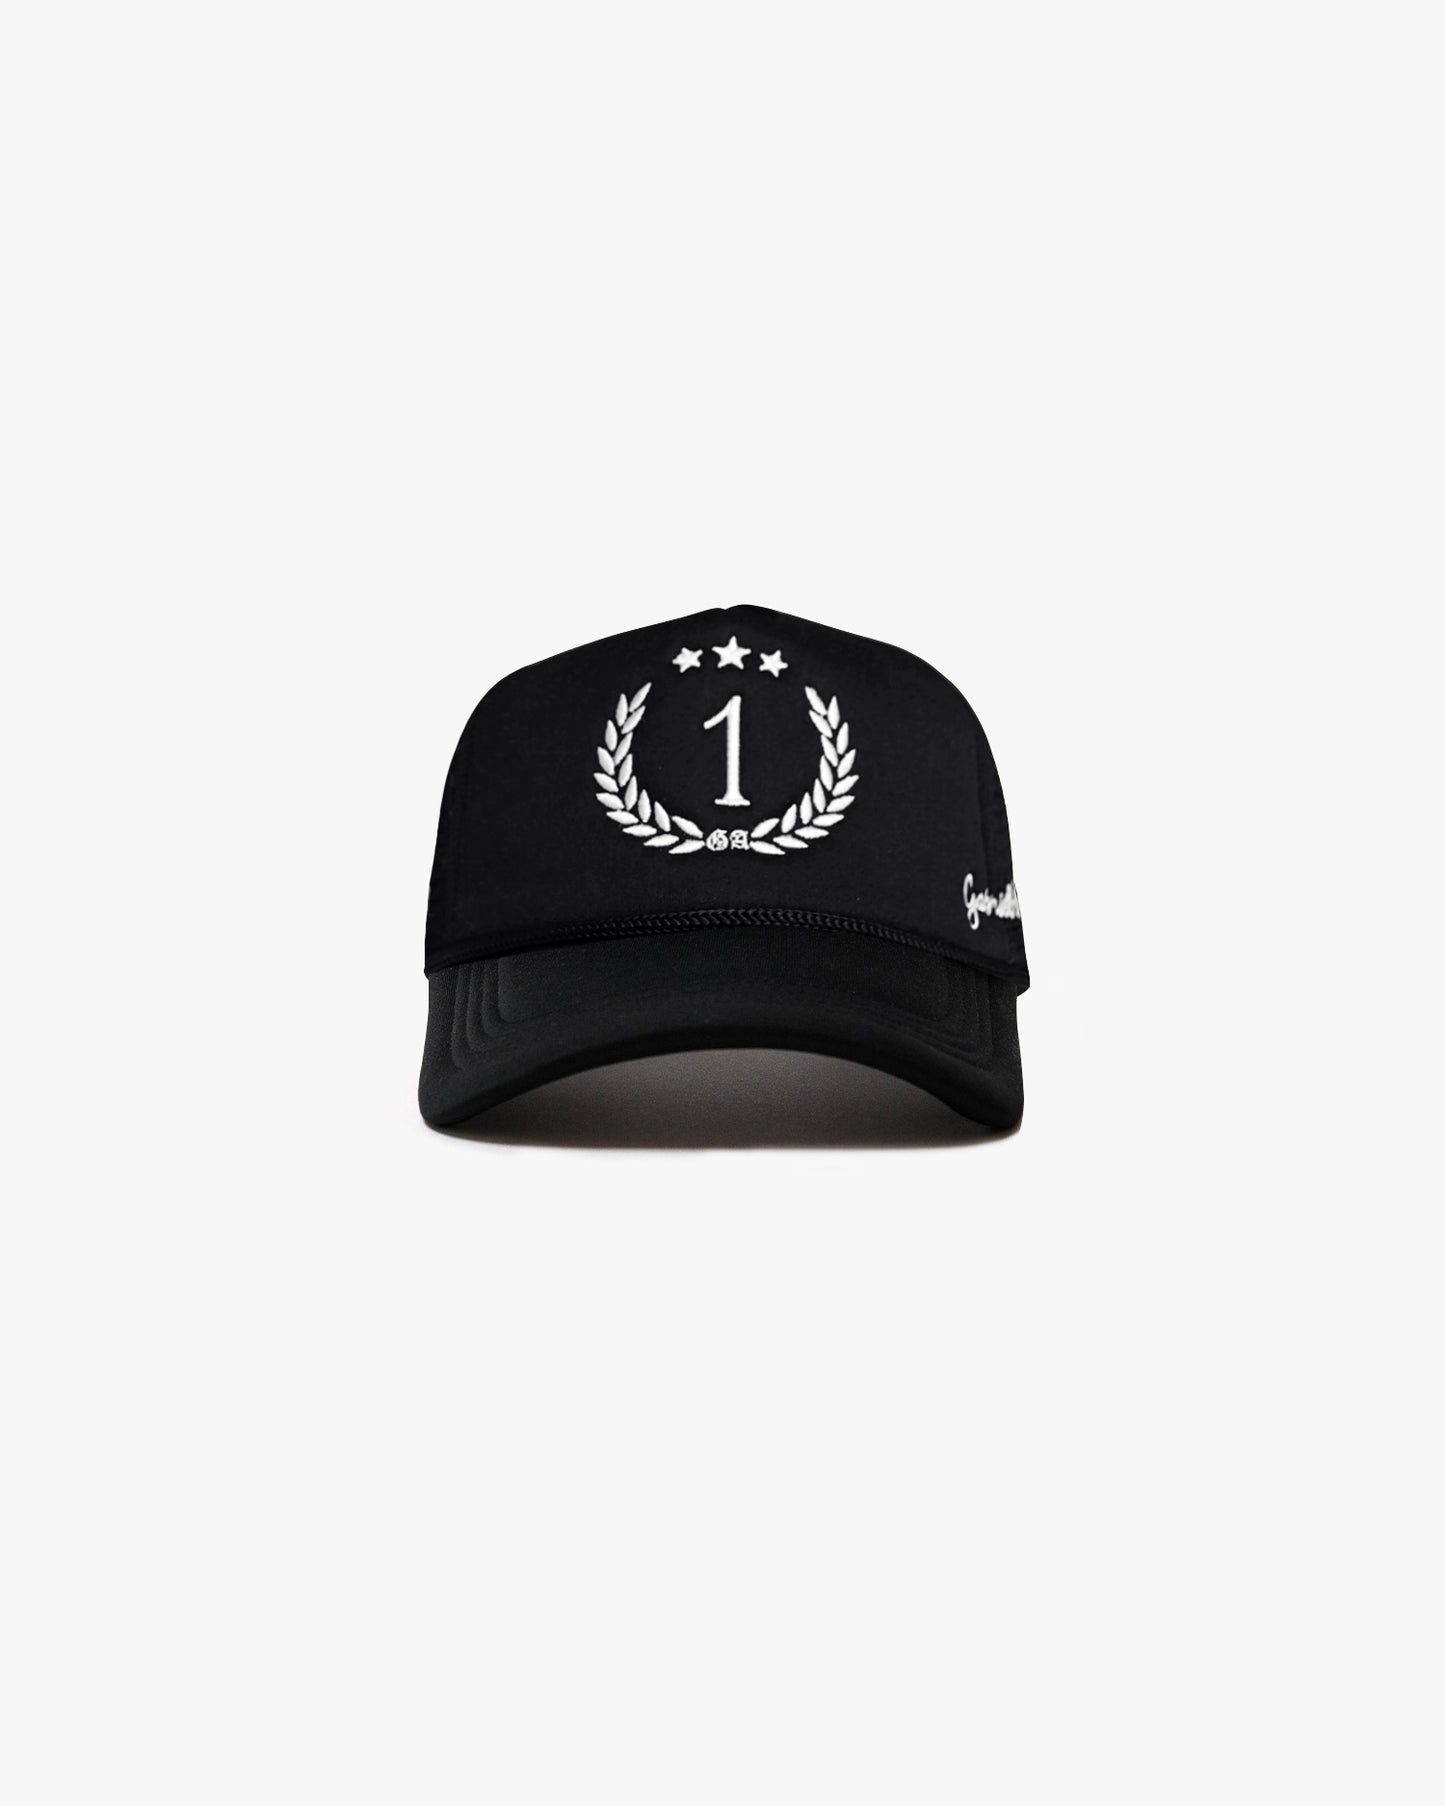 Black cap with white number 1  embroidery in the front